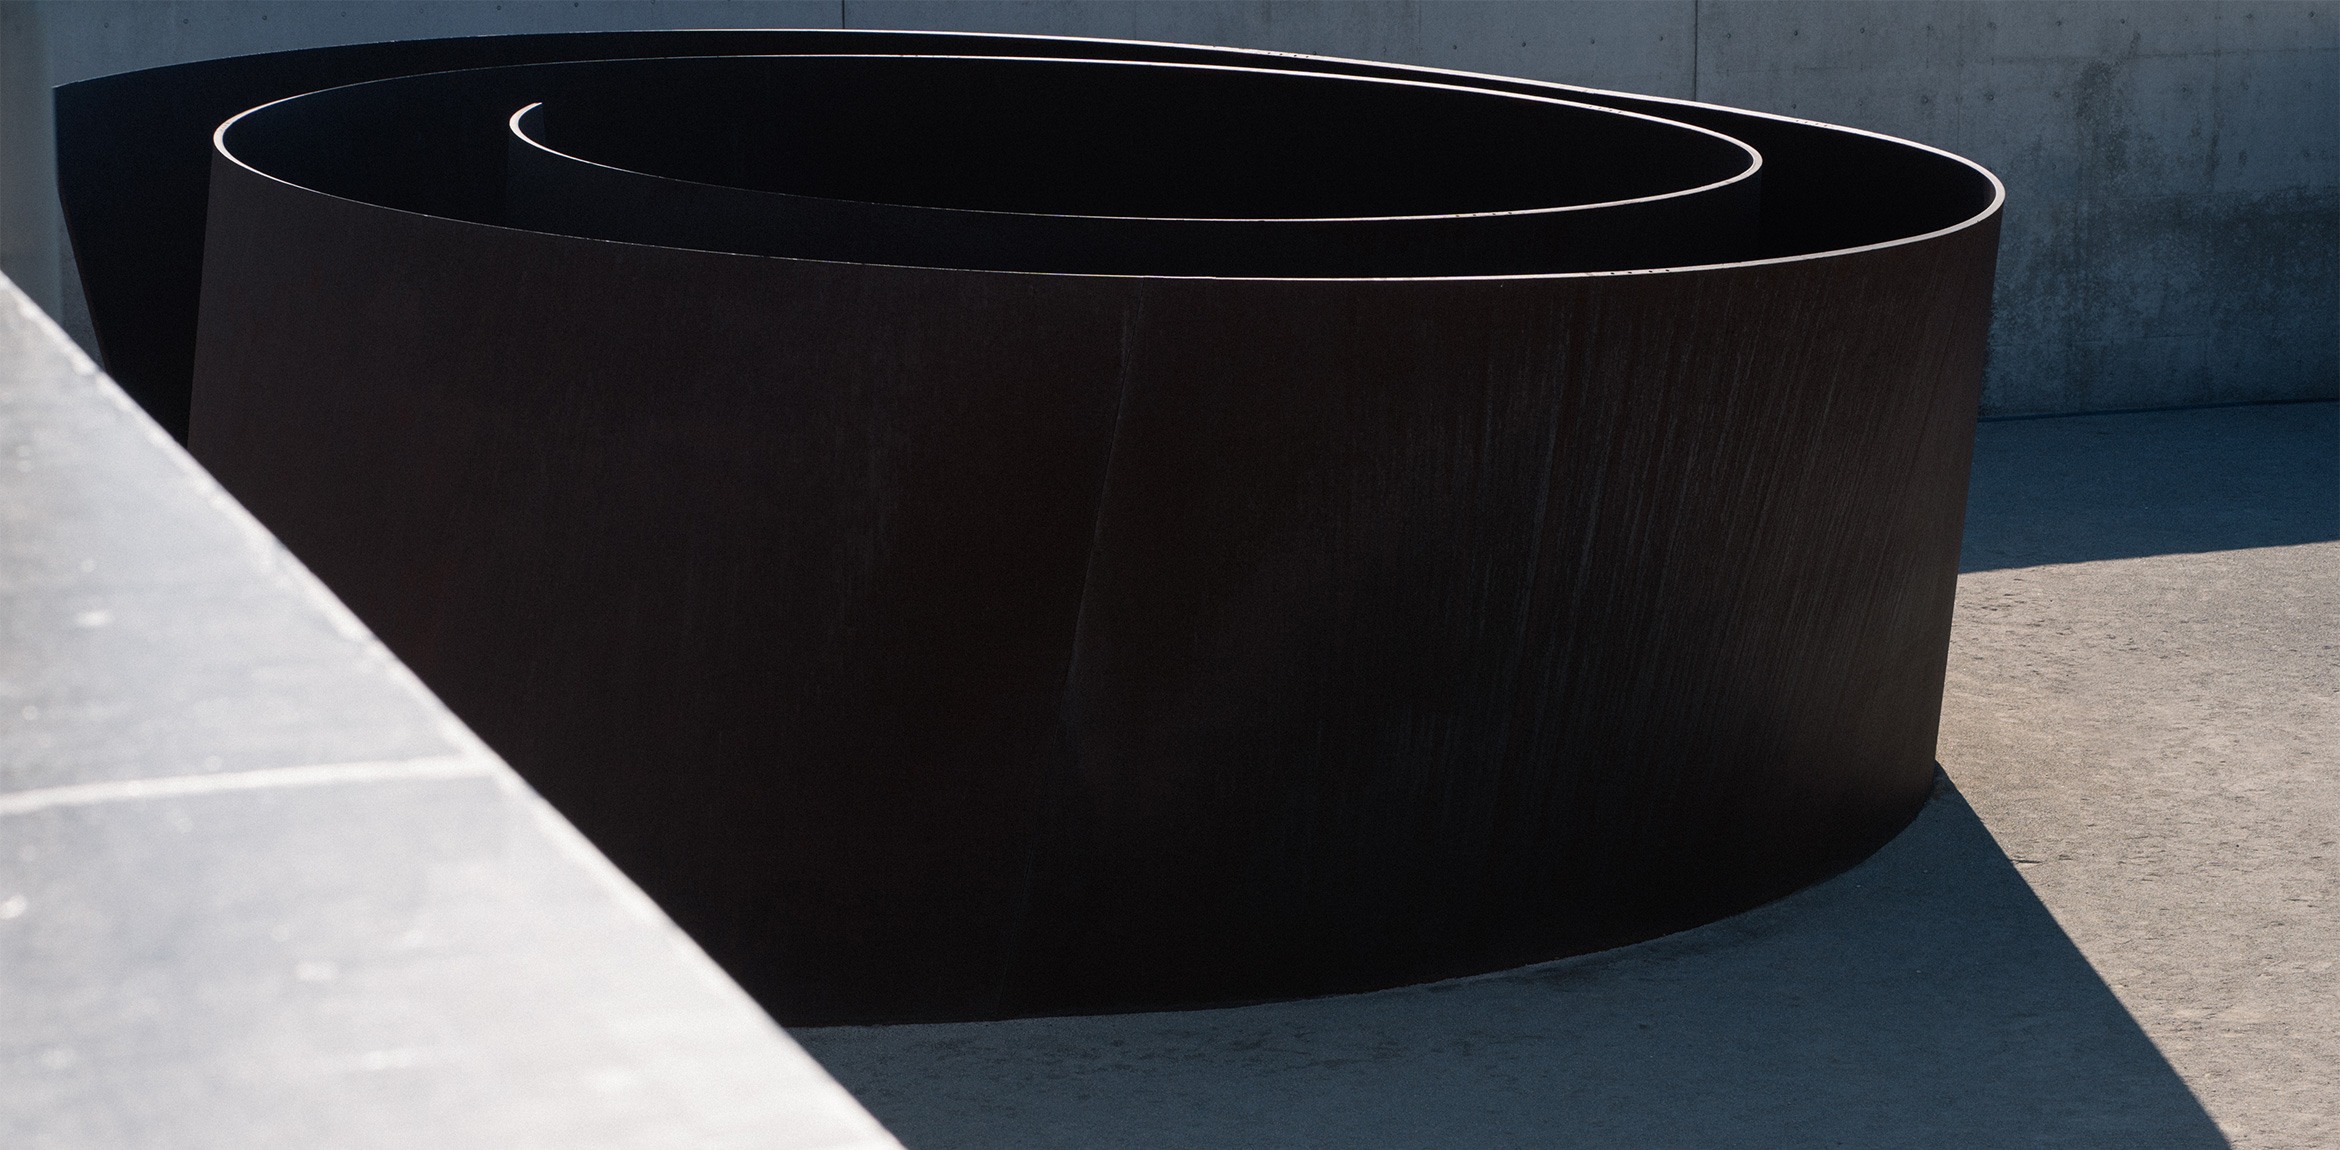 Richard Serra's Joe, a large steel sculpture in the shape of a spiral, in the museum courtyard